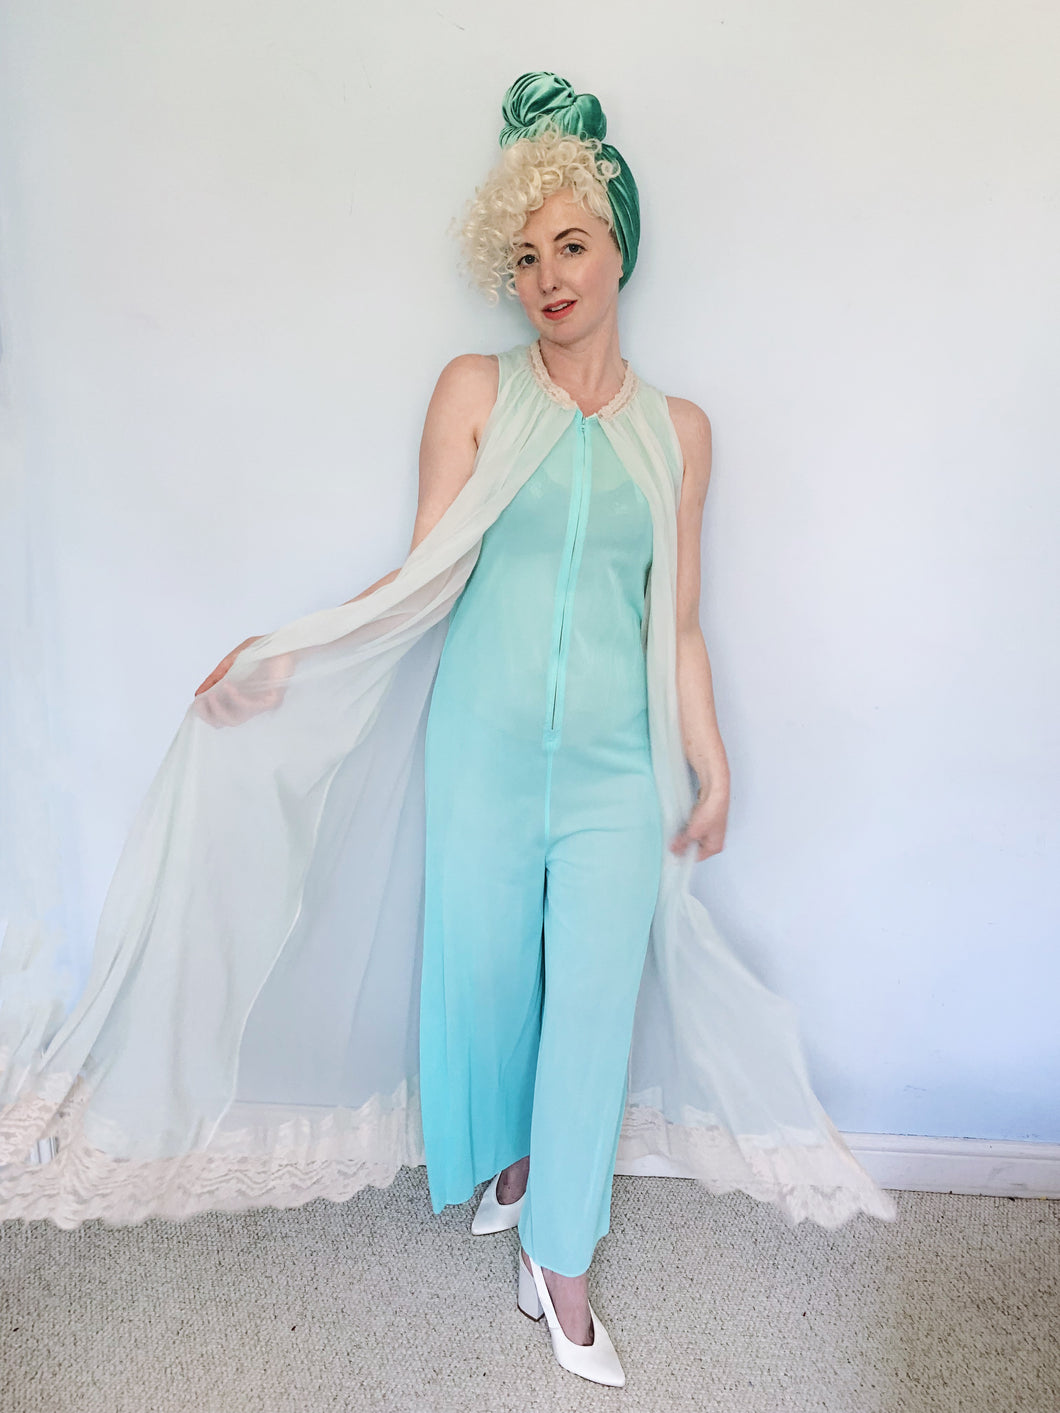 *RESERVED FOR SHARON* Vintage Nylon Jumpsuit - Baby Blue with Lace overdress